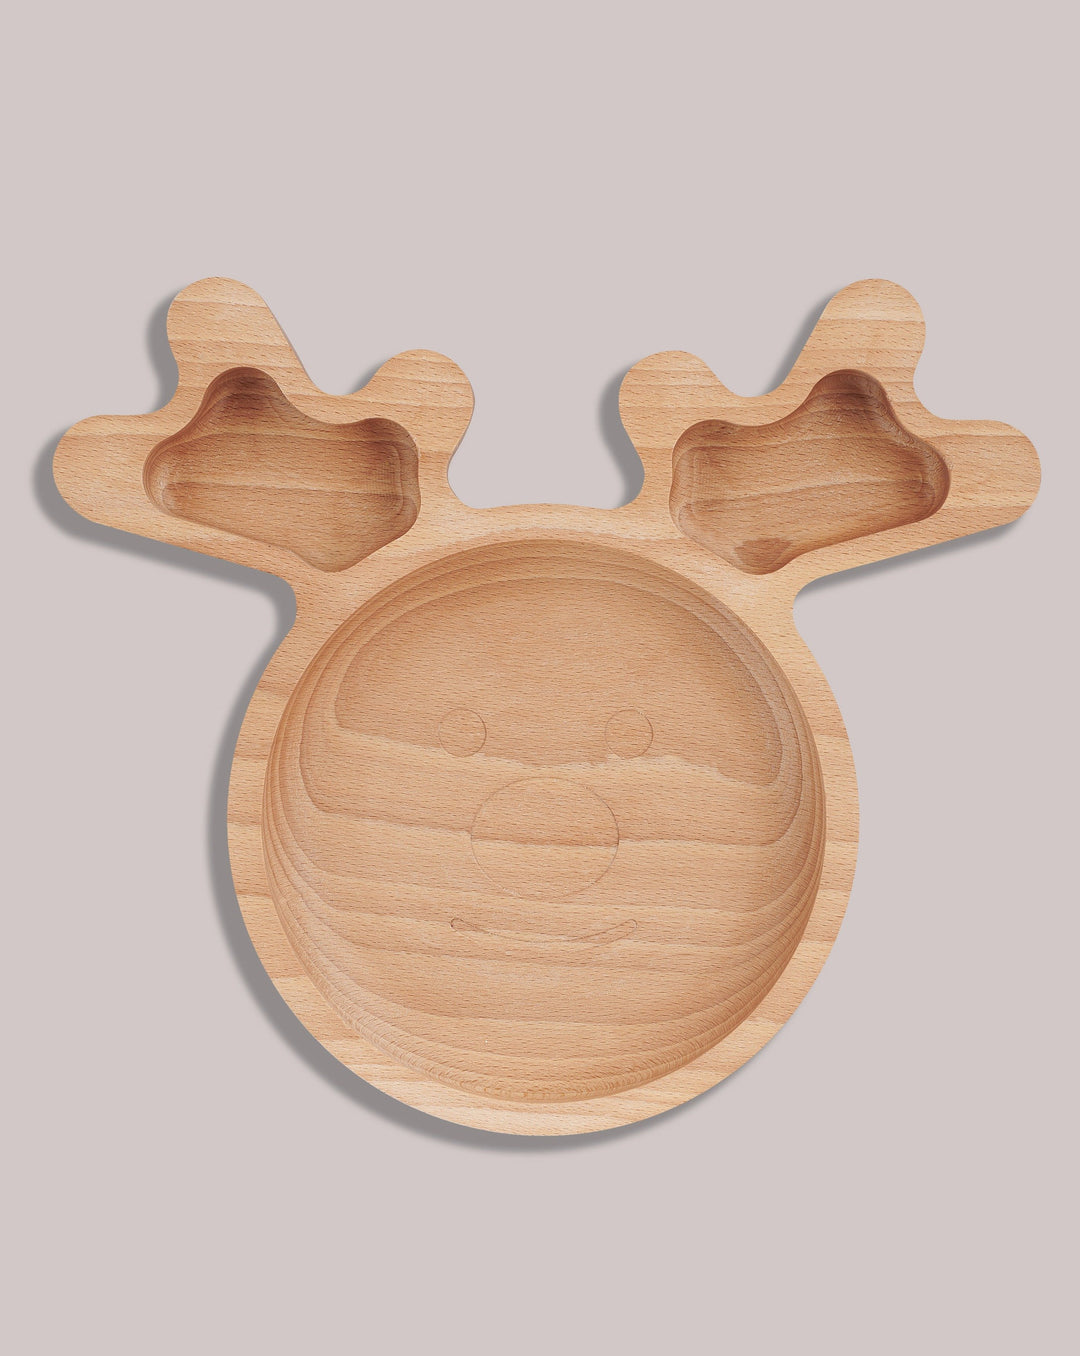 THE WOOD LIFE PROJECT Plate For Children The Reindeer Plate - For Kids + Toddlers